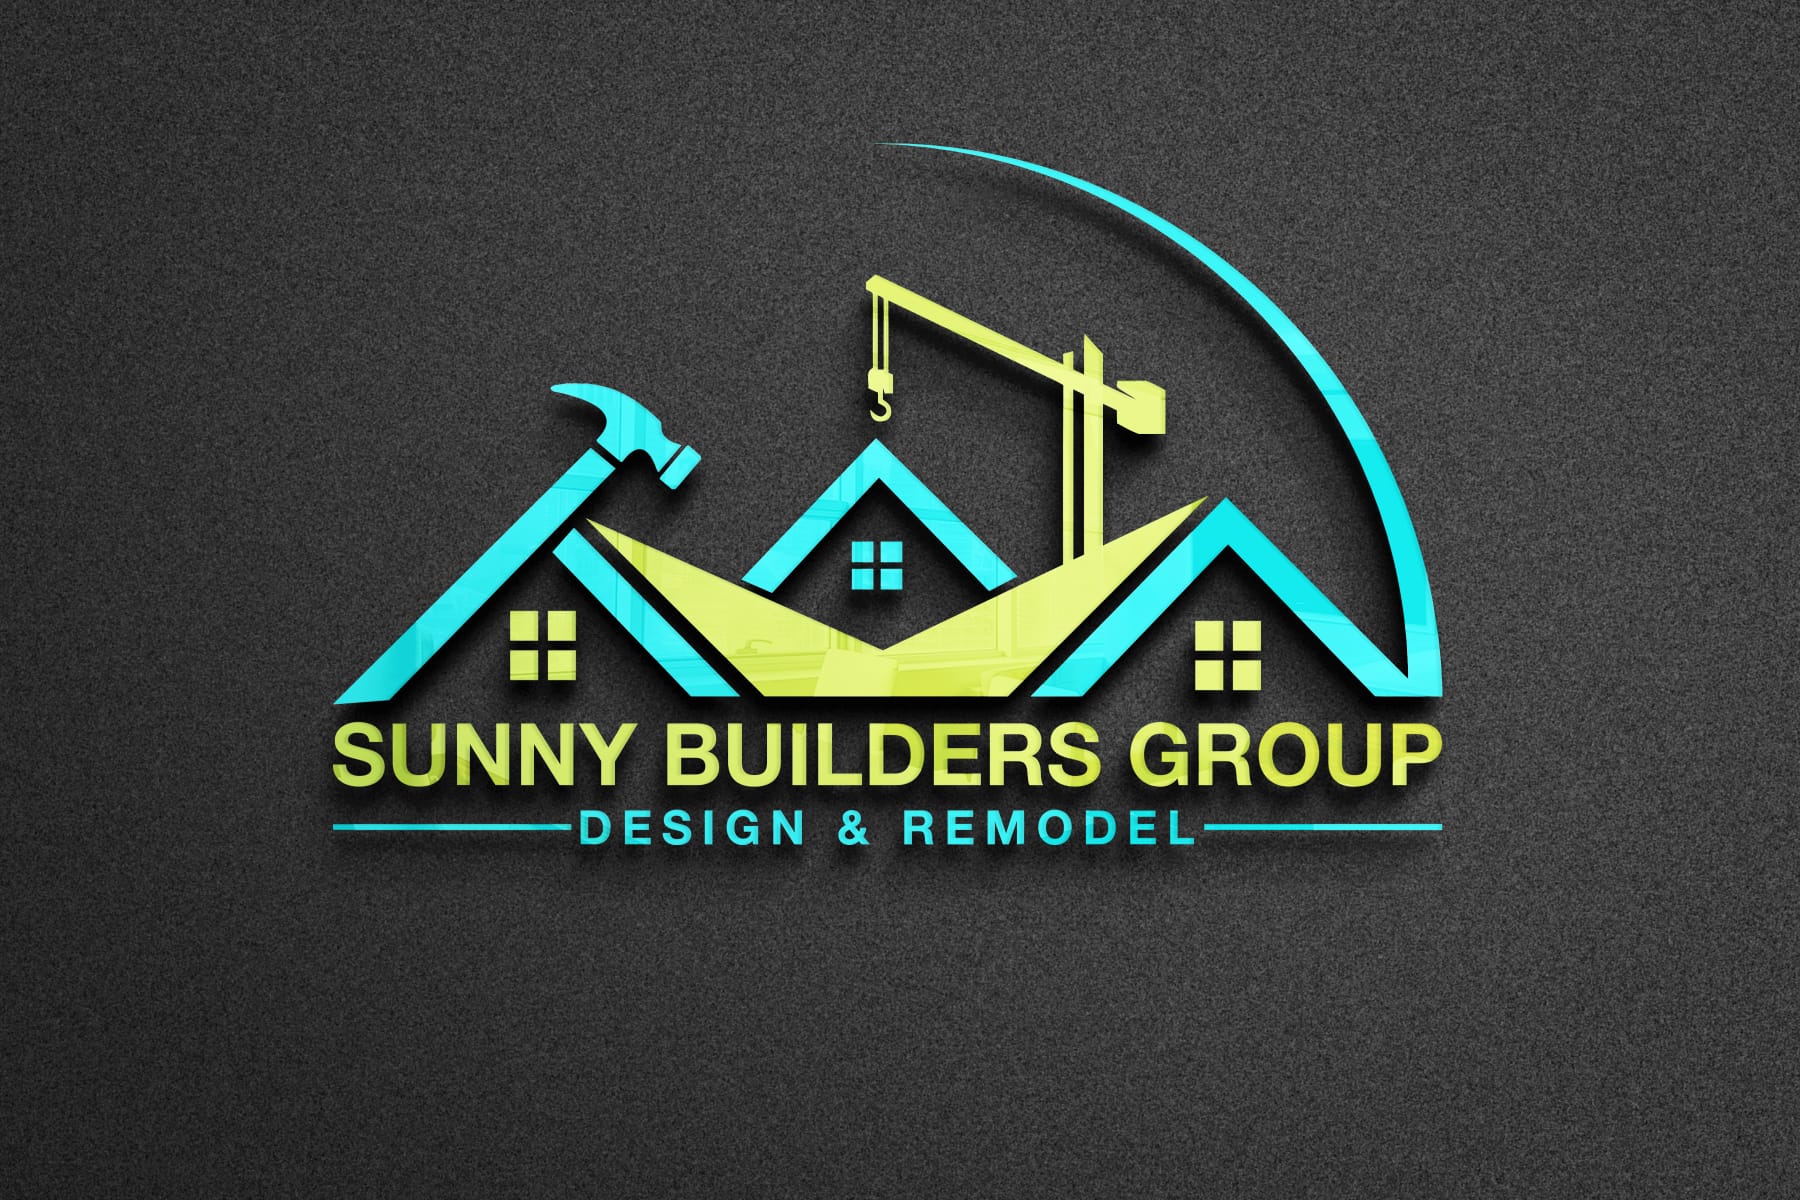 Sunny Builders Group Offers Superior Turf Installation Across San Diego